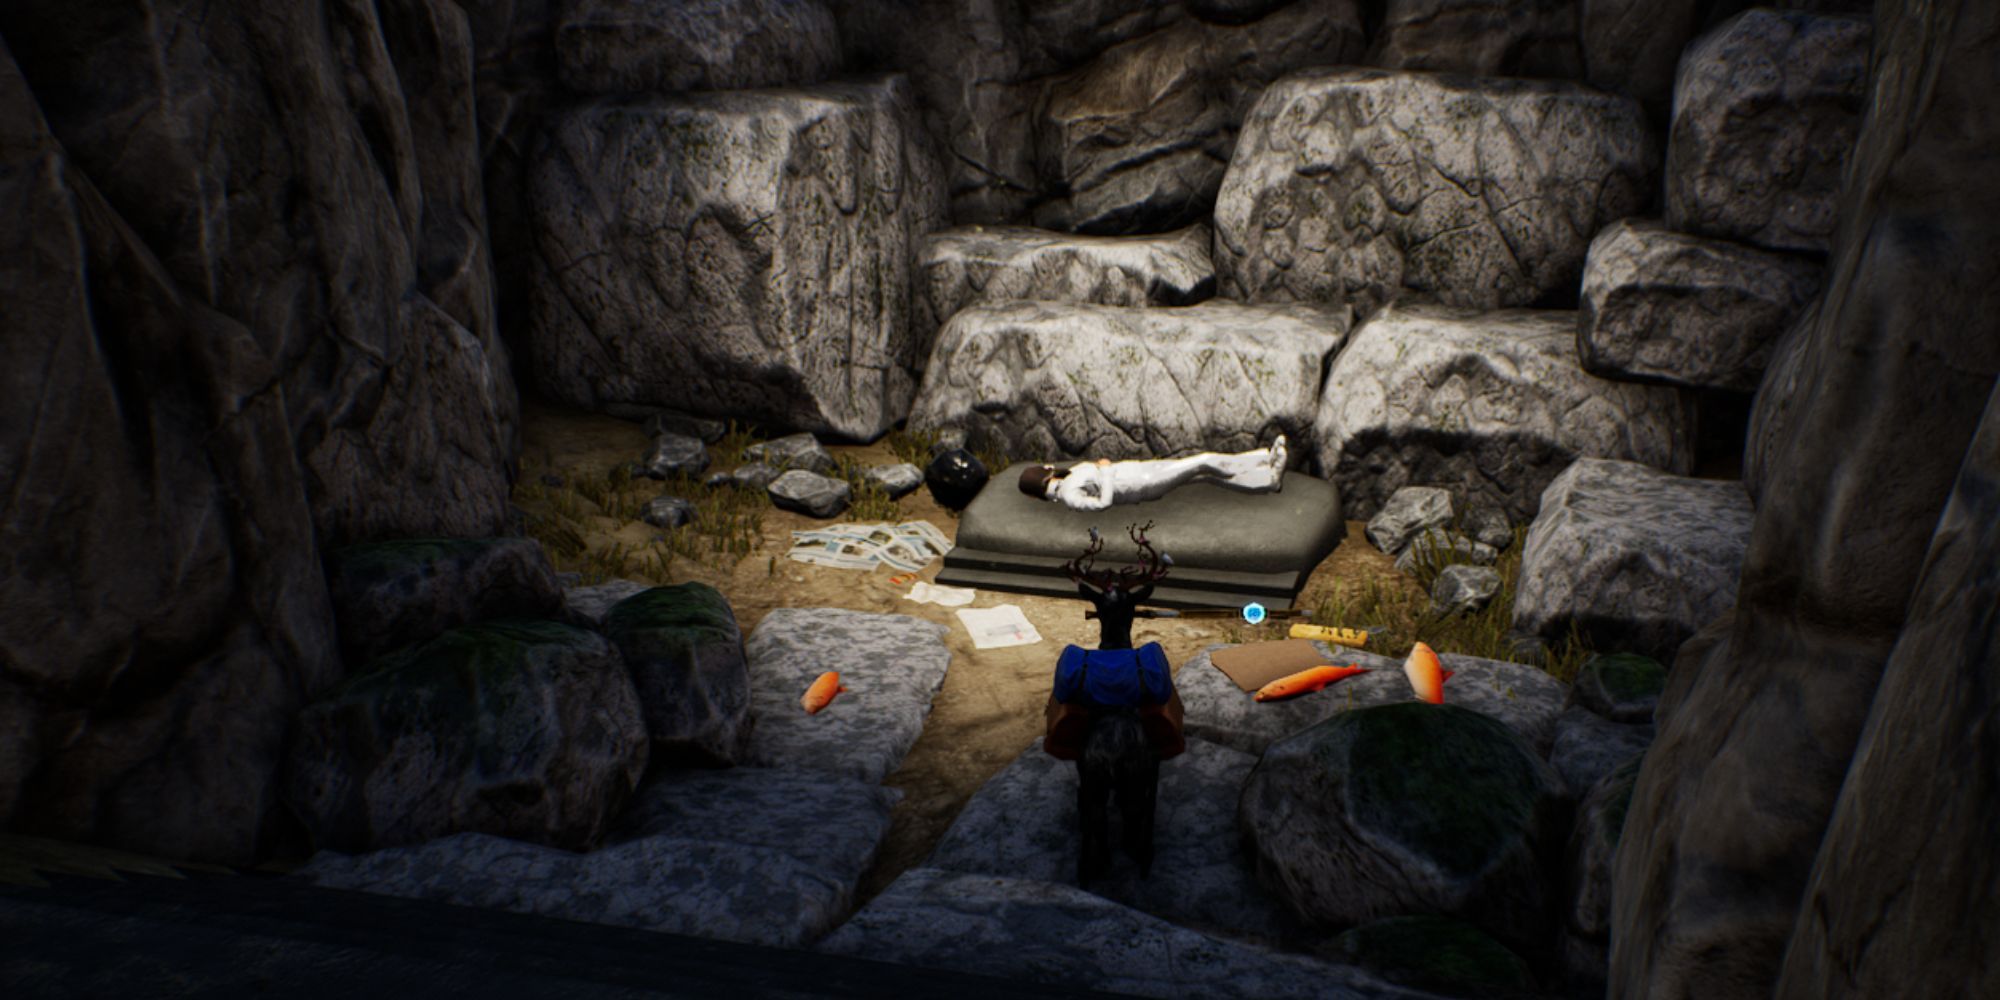 Pilgor faces the Capra Erectus lying down on a mattress, as rocks, fish, and bread surround them